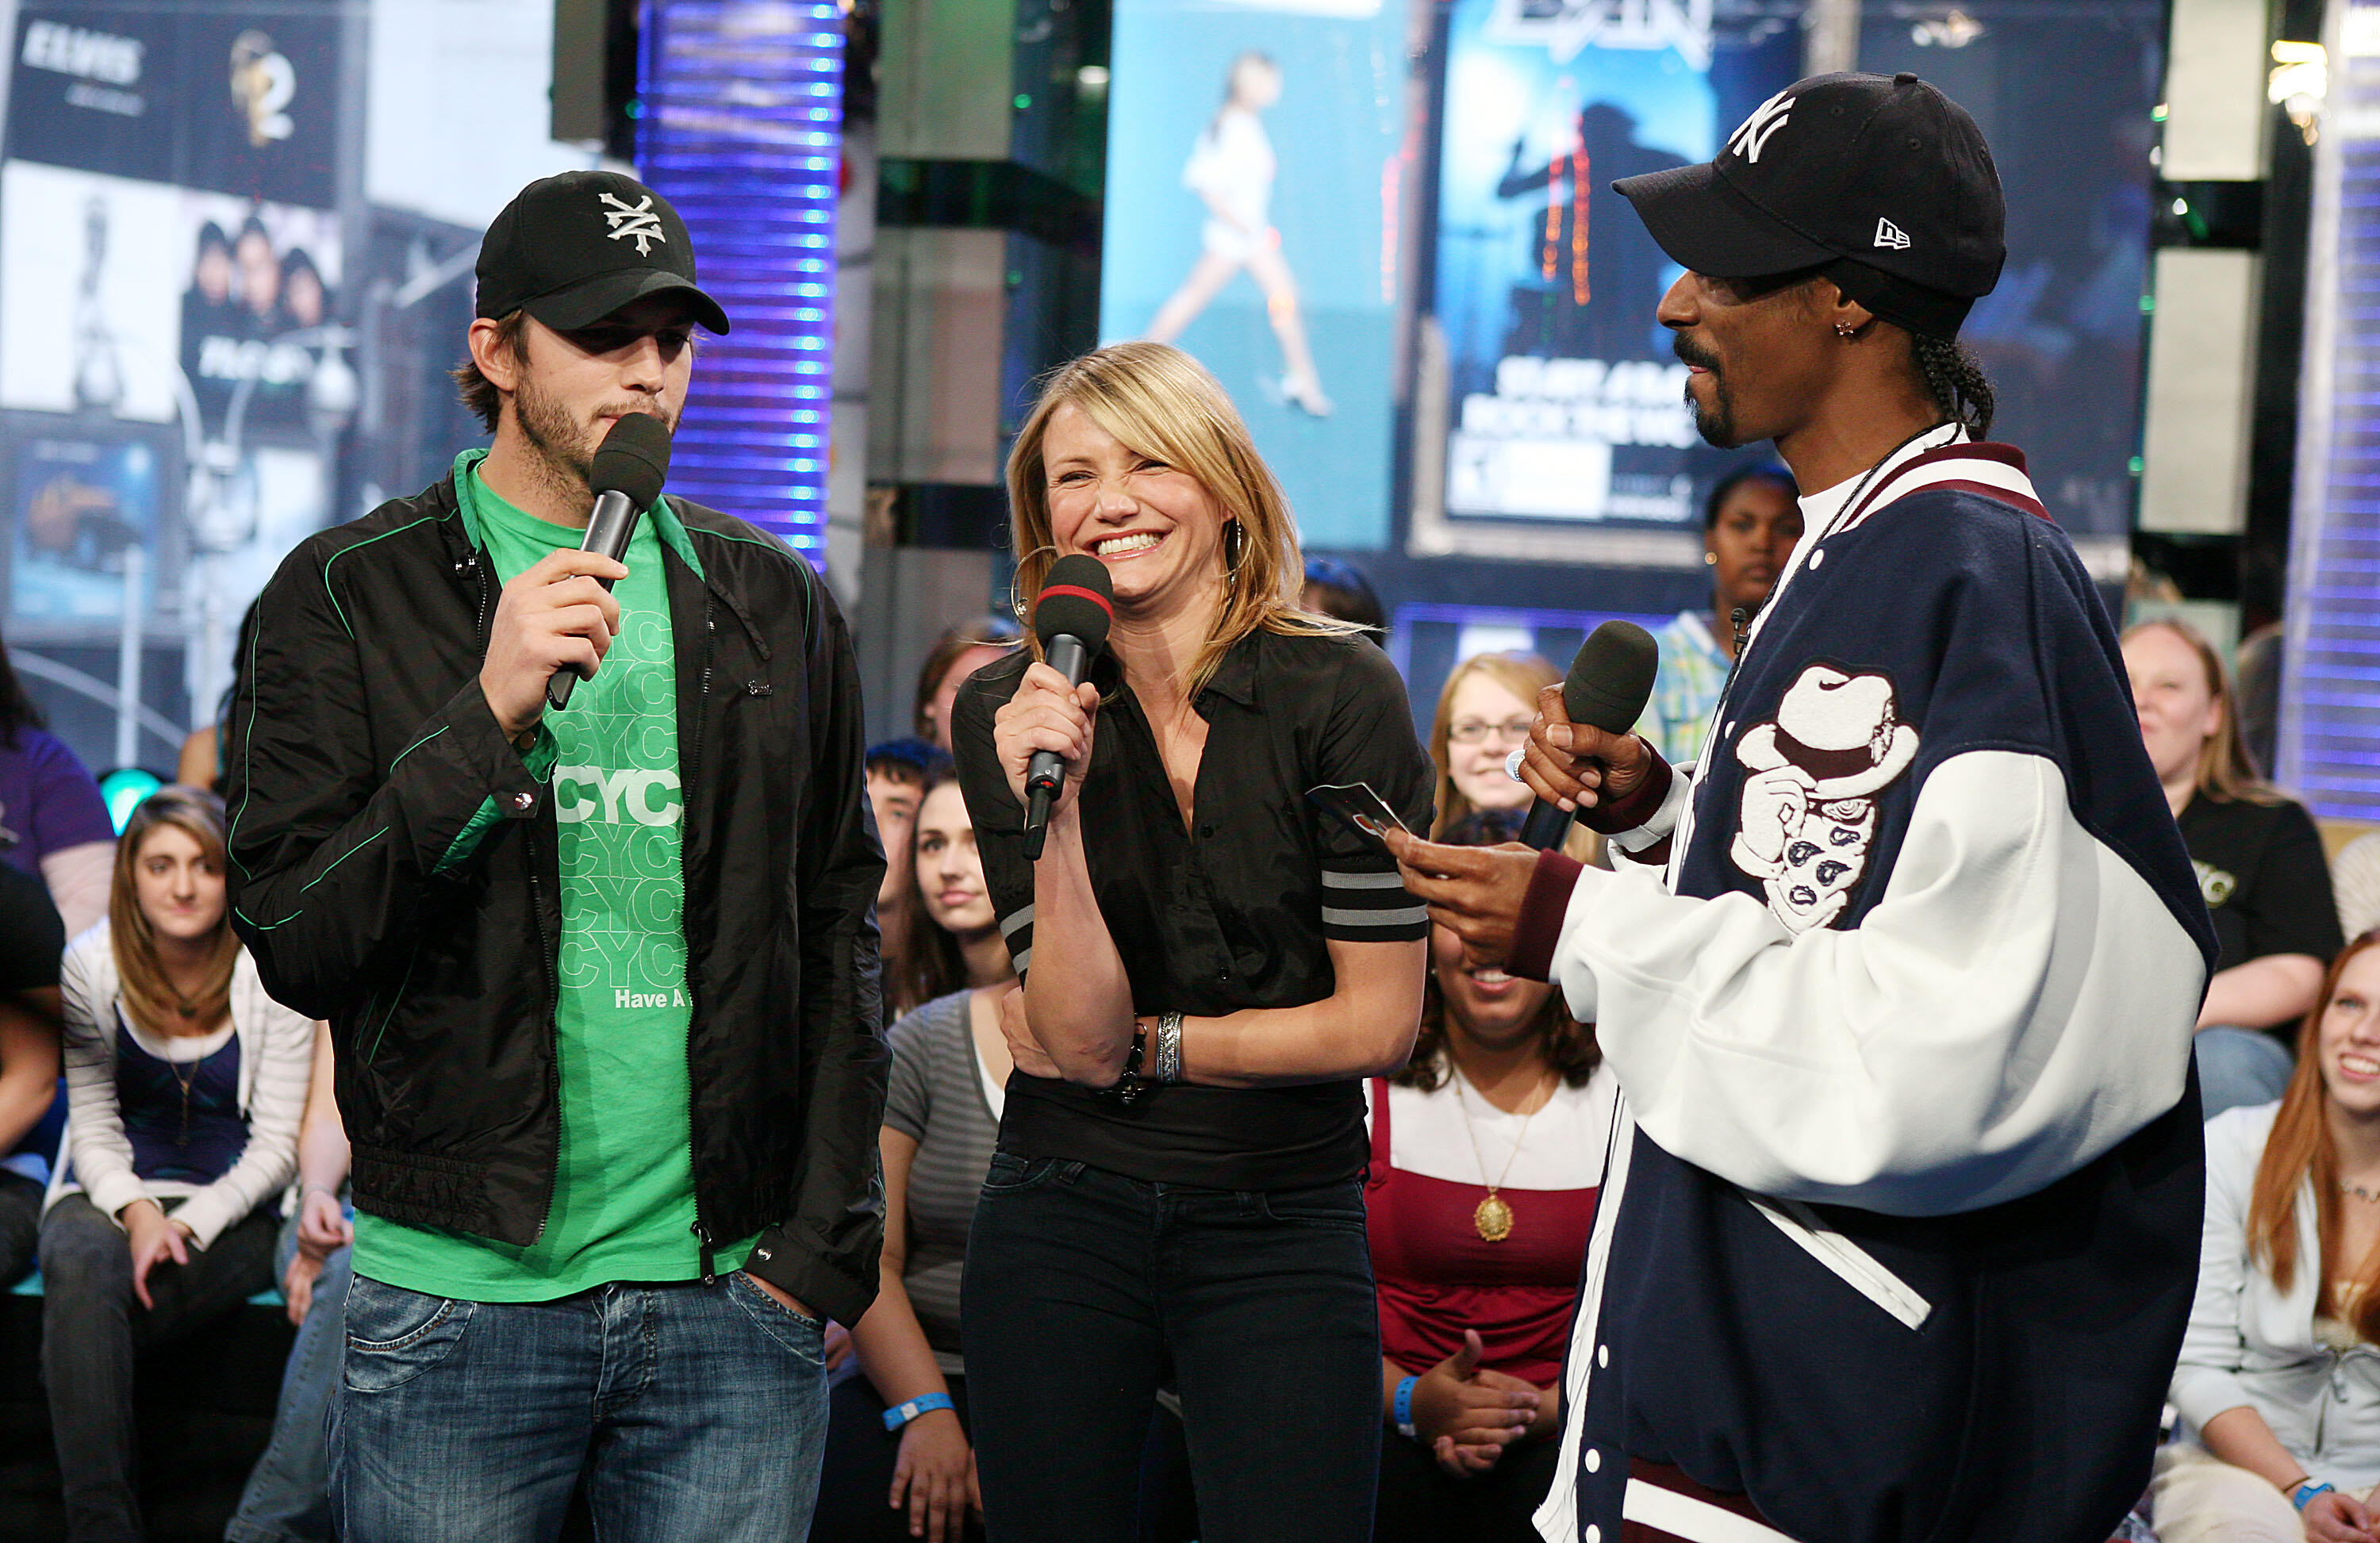 NEW YORK - MAY 05:  (U.S. TABS OUT) (L-R) Ashton Kutcher, Cameron Diaz, and Snoop Dogg appear onstage during MTV's Total Request Live at the MTV Times Square Studios on May 5, 2008 in New York City.  (Photo by Scott Gries/Getty Images)